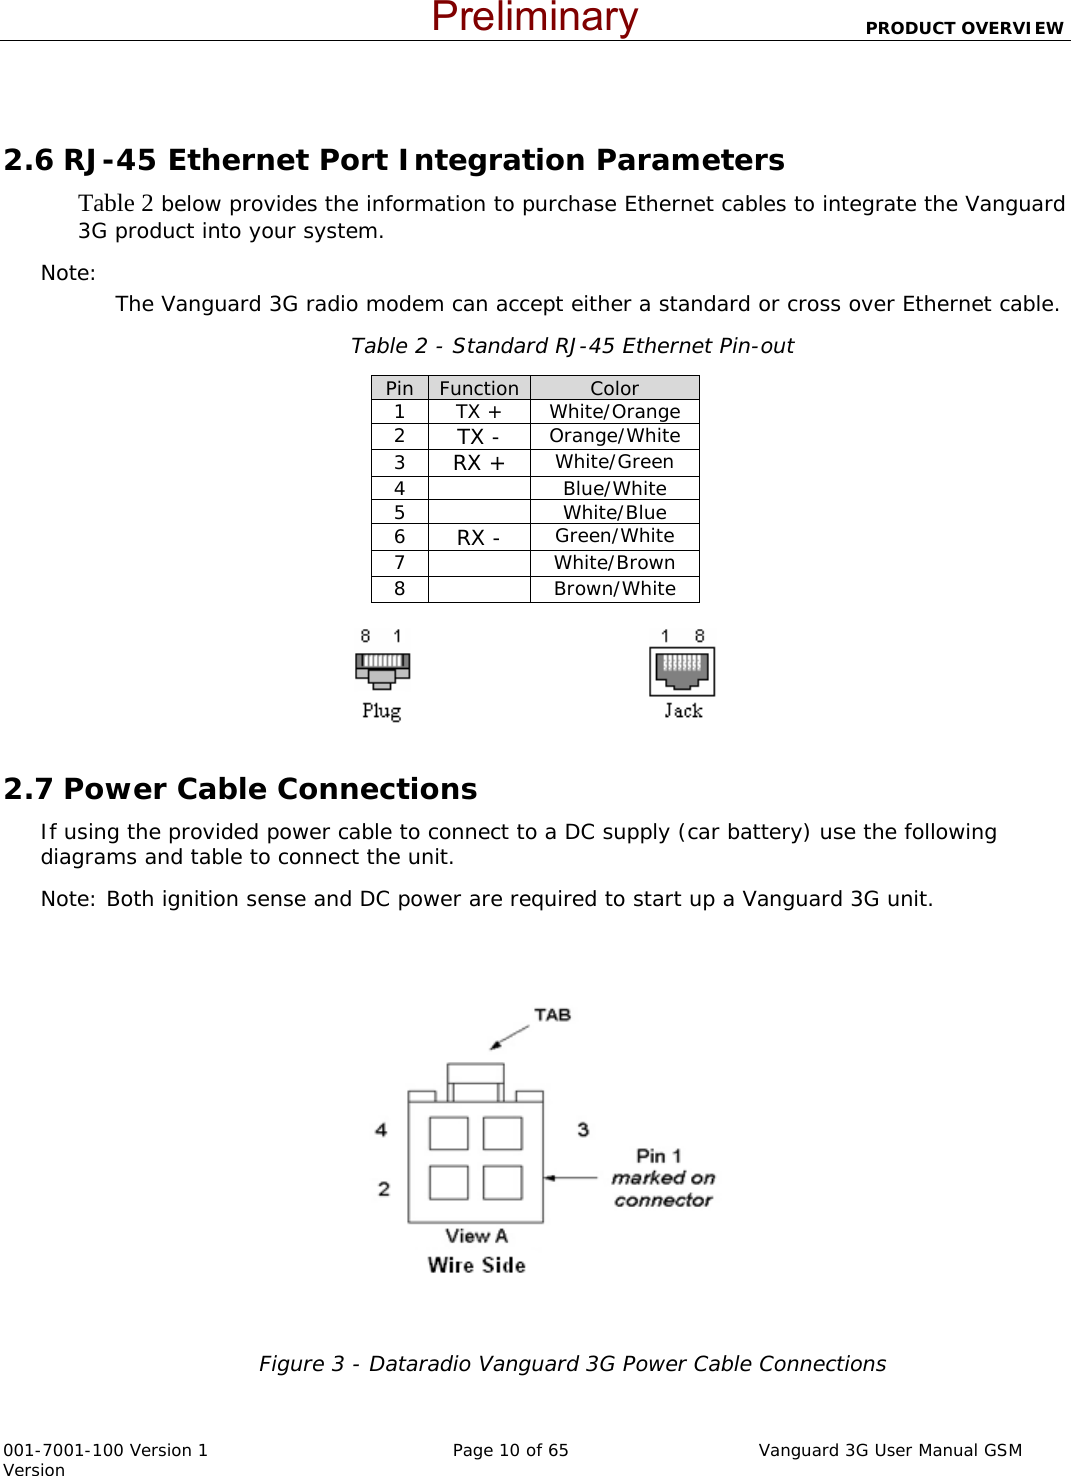                          PRODUCT OVERVIEW  001-7001-100 Version 1       Page 10 of 65       Vanguard 3G User Manual GSM Version   2.6 RJ-45 Ethernet Port Integration Parameters Table 2 below provides the information to purchase Ethernet cables to integrate the Vanguard 3G product into your system.  Note:   The Vanguard 3G radio modem can accept either a standard or cross over Ethernet cable.   Table 2 - Standard RJ-45 Ethernet Pin-out Pin  Function Color 1 TX + White/Orange 2  TX - Orange/White 3  RX + White/Green 4   Blue/White 5   White/Blue 6  RX - Green/White 7   White/Brown 8   Brown/White                                            2.7 Power Cable Connections If using the provided power cable to connect to a DC supply (car battery) use the following diagrams and table to connect the unit.   Note: Both ignition sense and DC power are required to start up a Vanguard 3G unit.  Figure 3 - Dataradio Vanguard 3G Power Cable Connections  Preliminary